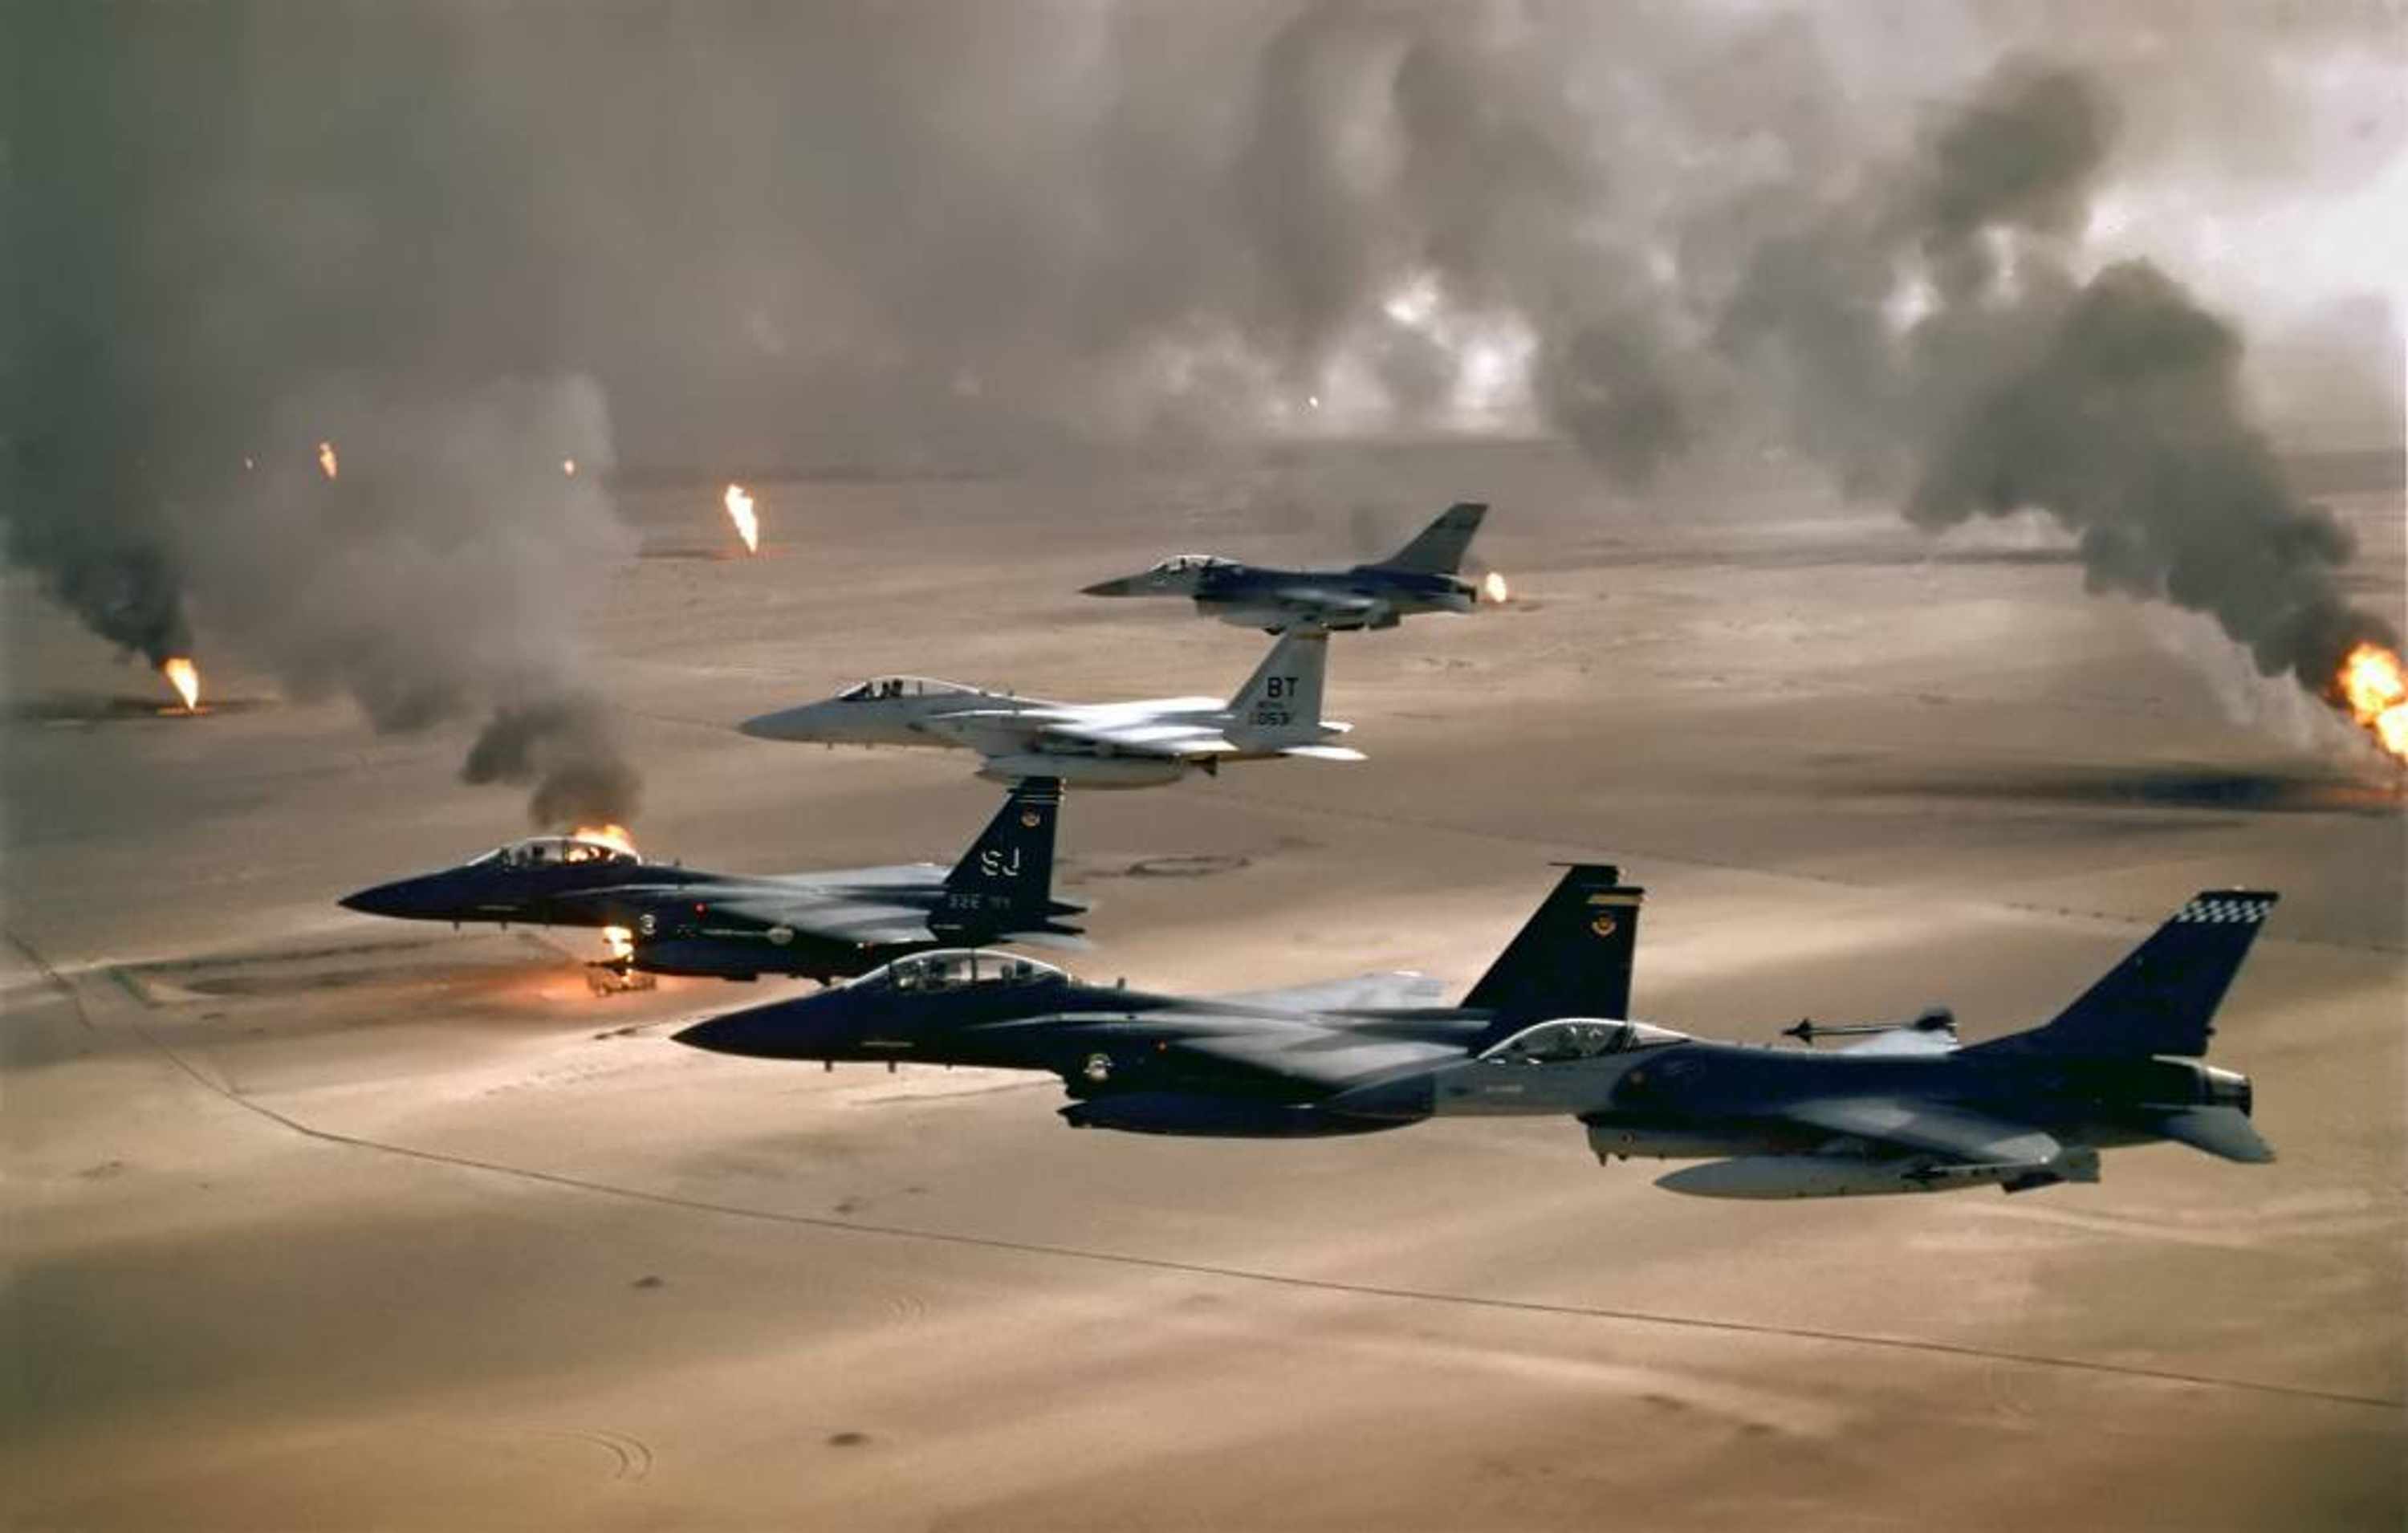 Planes fly over Iraq oil field